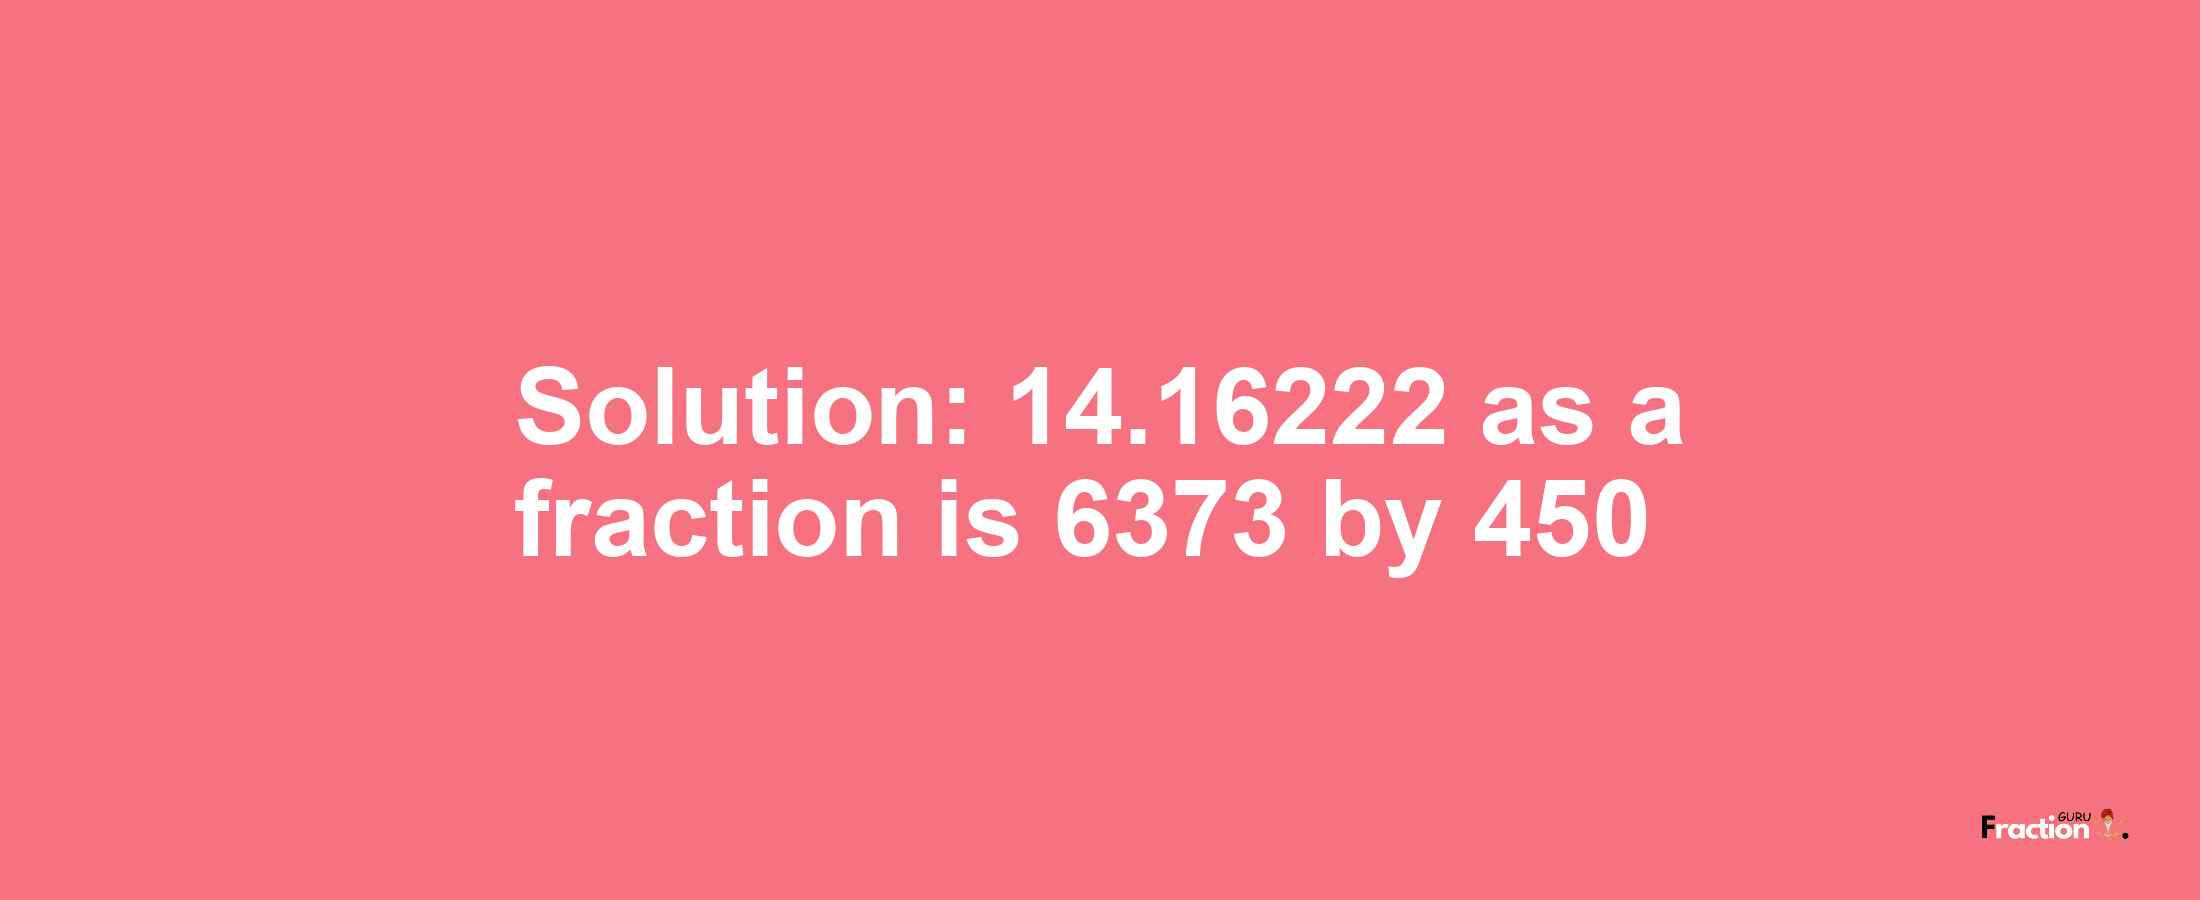 Solution:14.16222 as a fraction is 6373/450